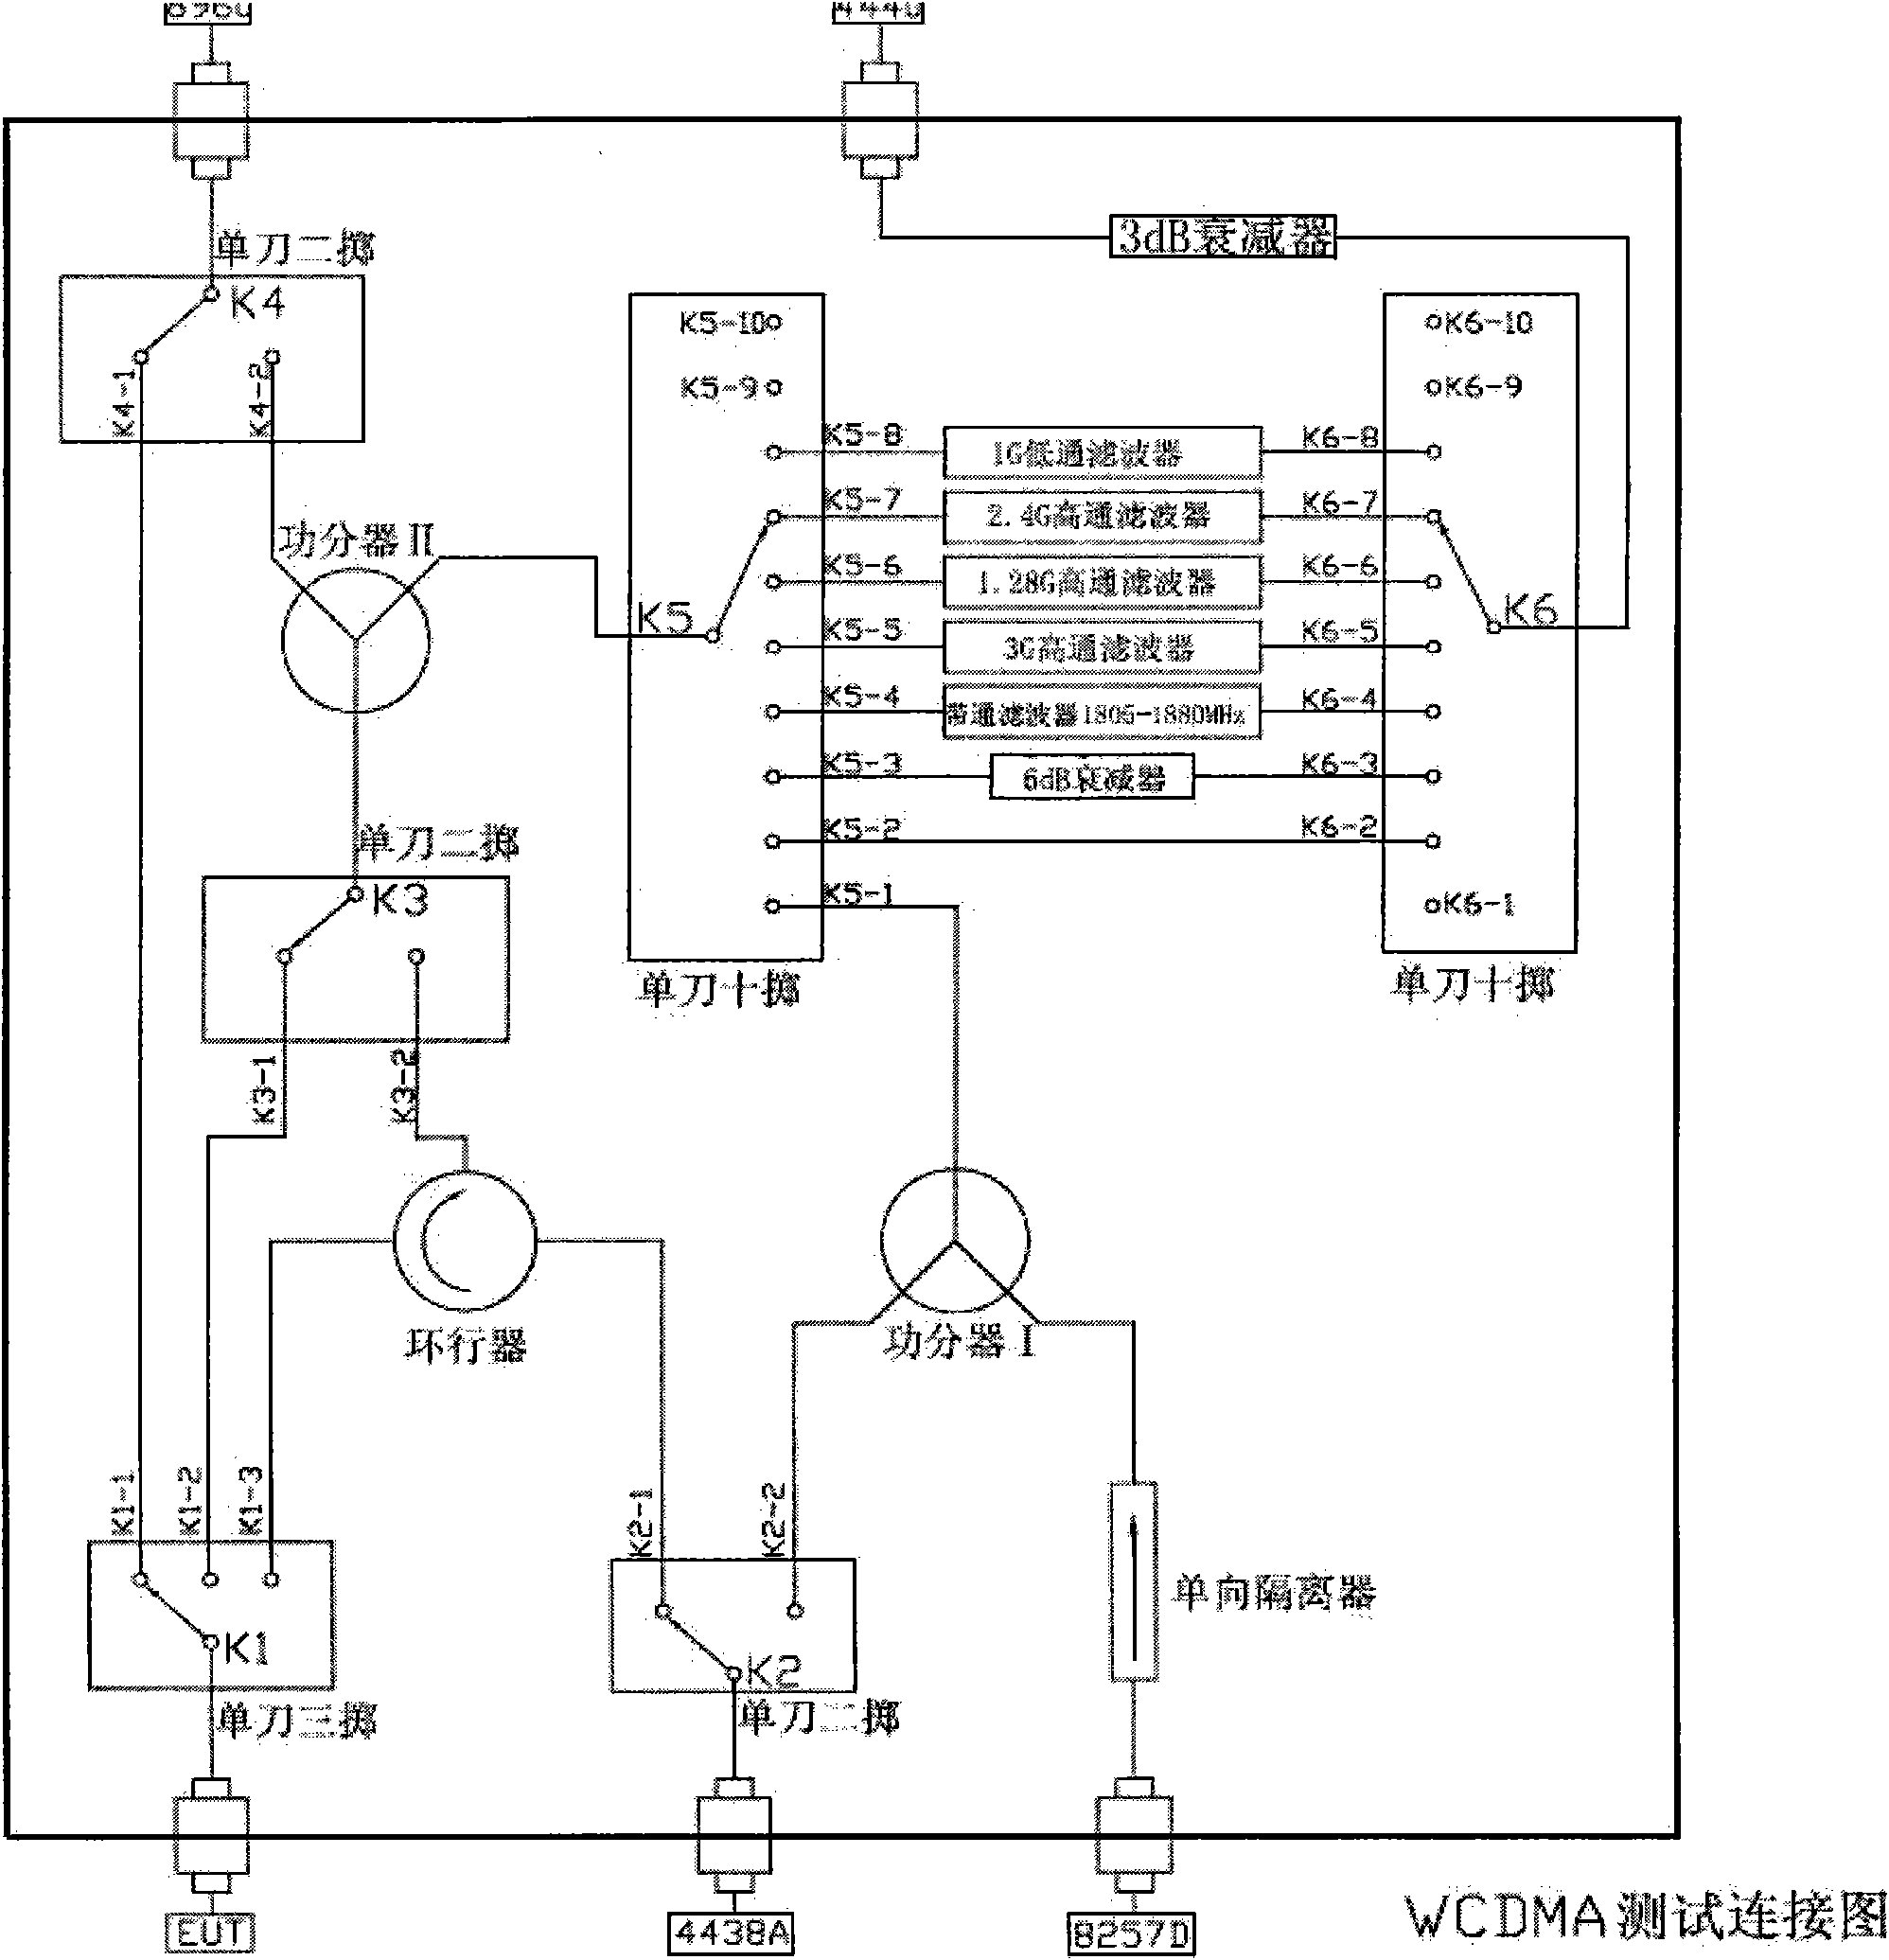 Radio frequency switching unit capable of being used for automatic testing of WCDMA (Wideband Code Division Multiple Access) /GSM (Global System for Mobile Communication) terminal radio frequency